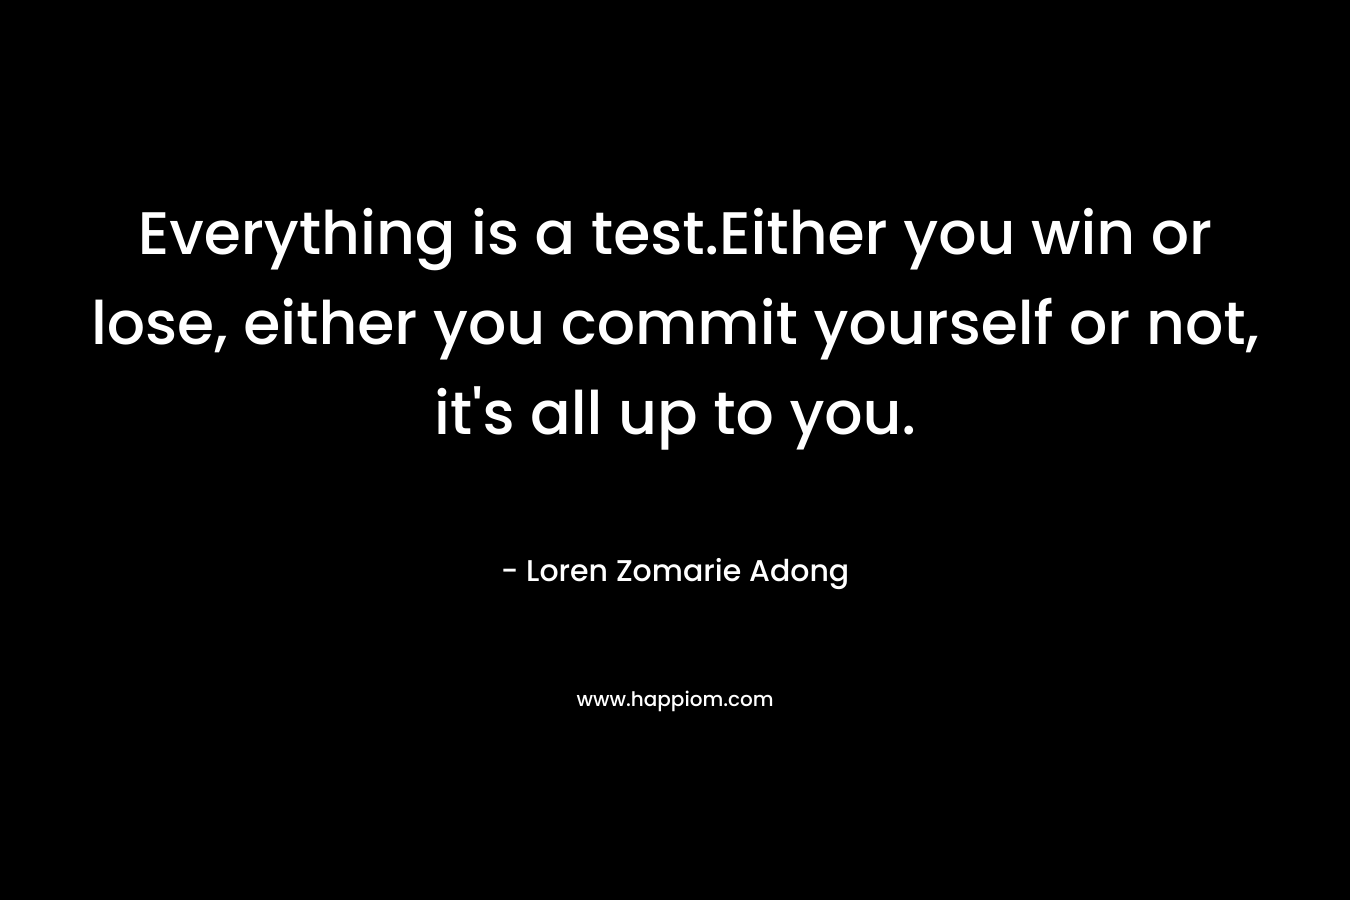 Everything is a test.Either you win or lose, either you commit yourself or not, it's all up to you.